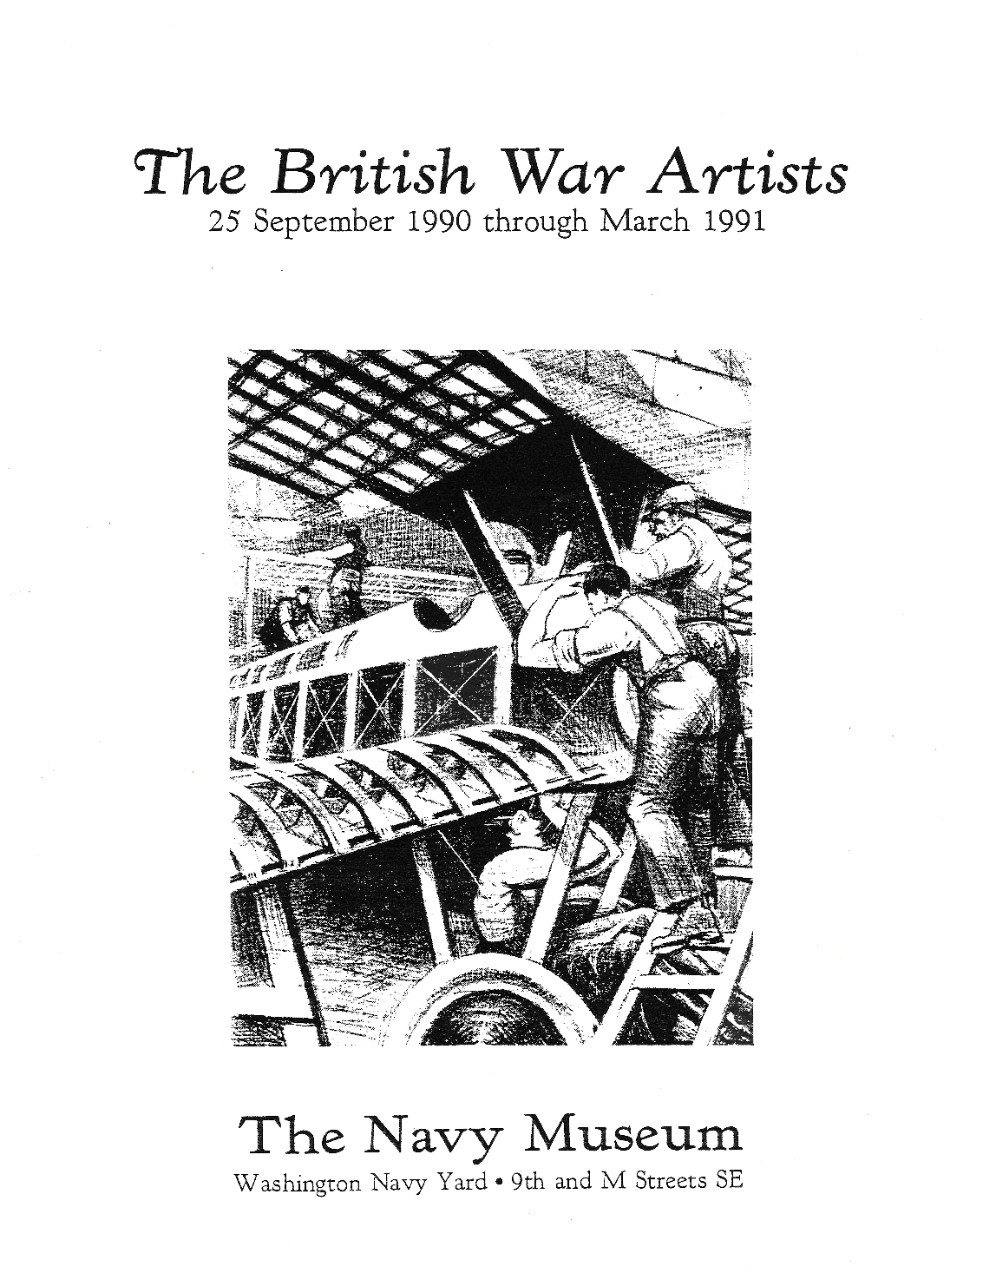 British War Artists Pamphlet.   National Museum of the U.S. Navy Archives.  